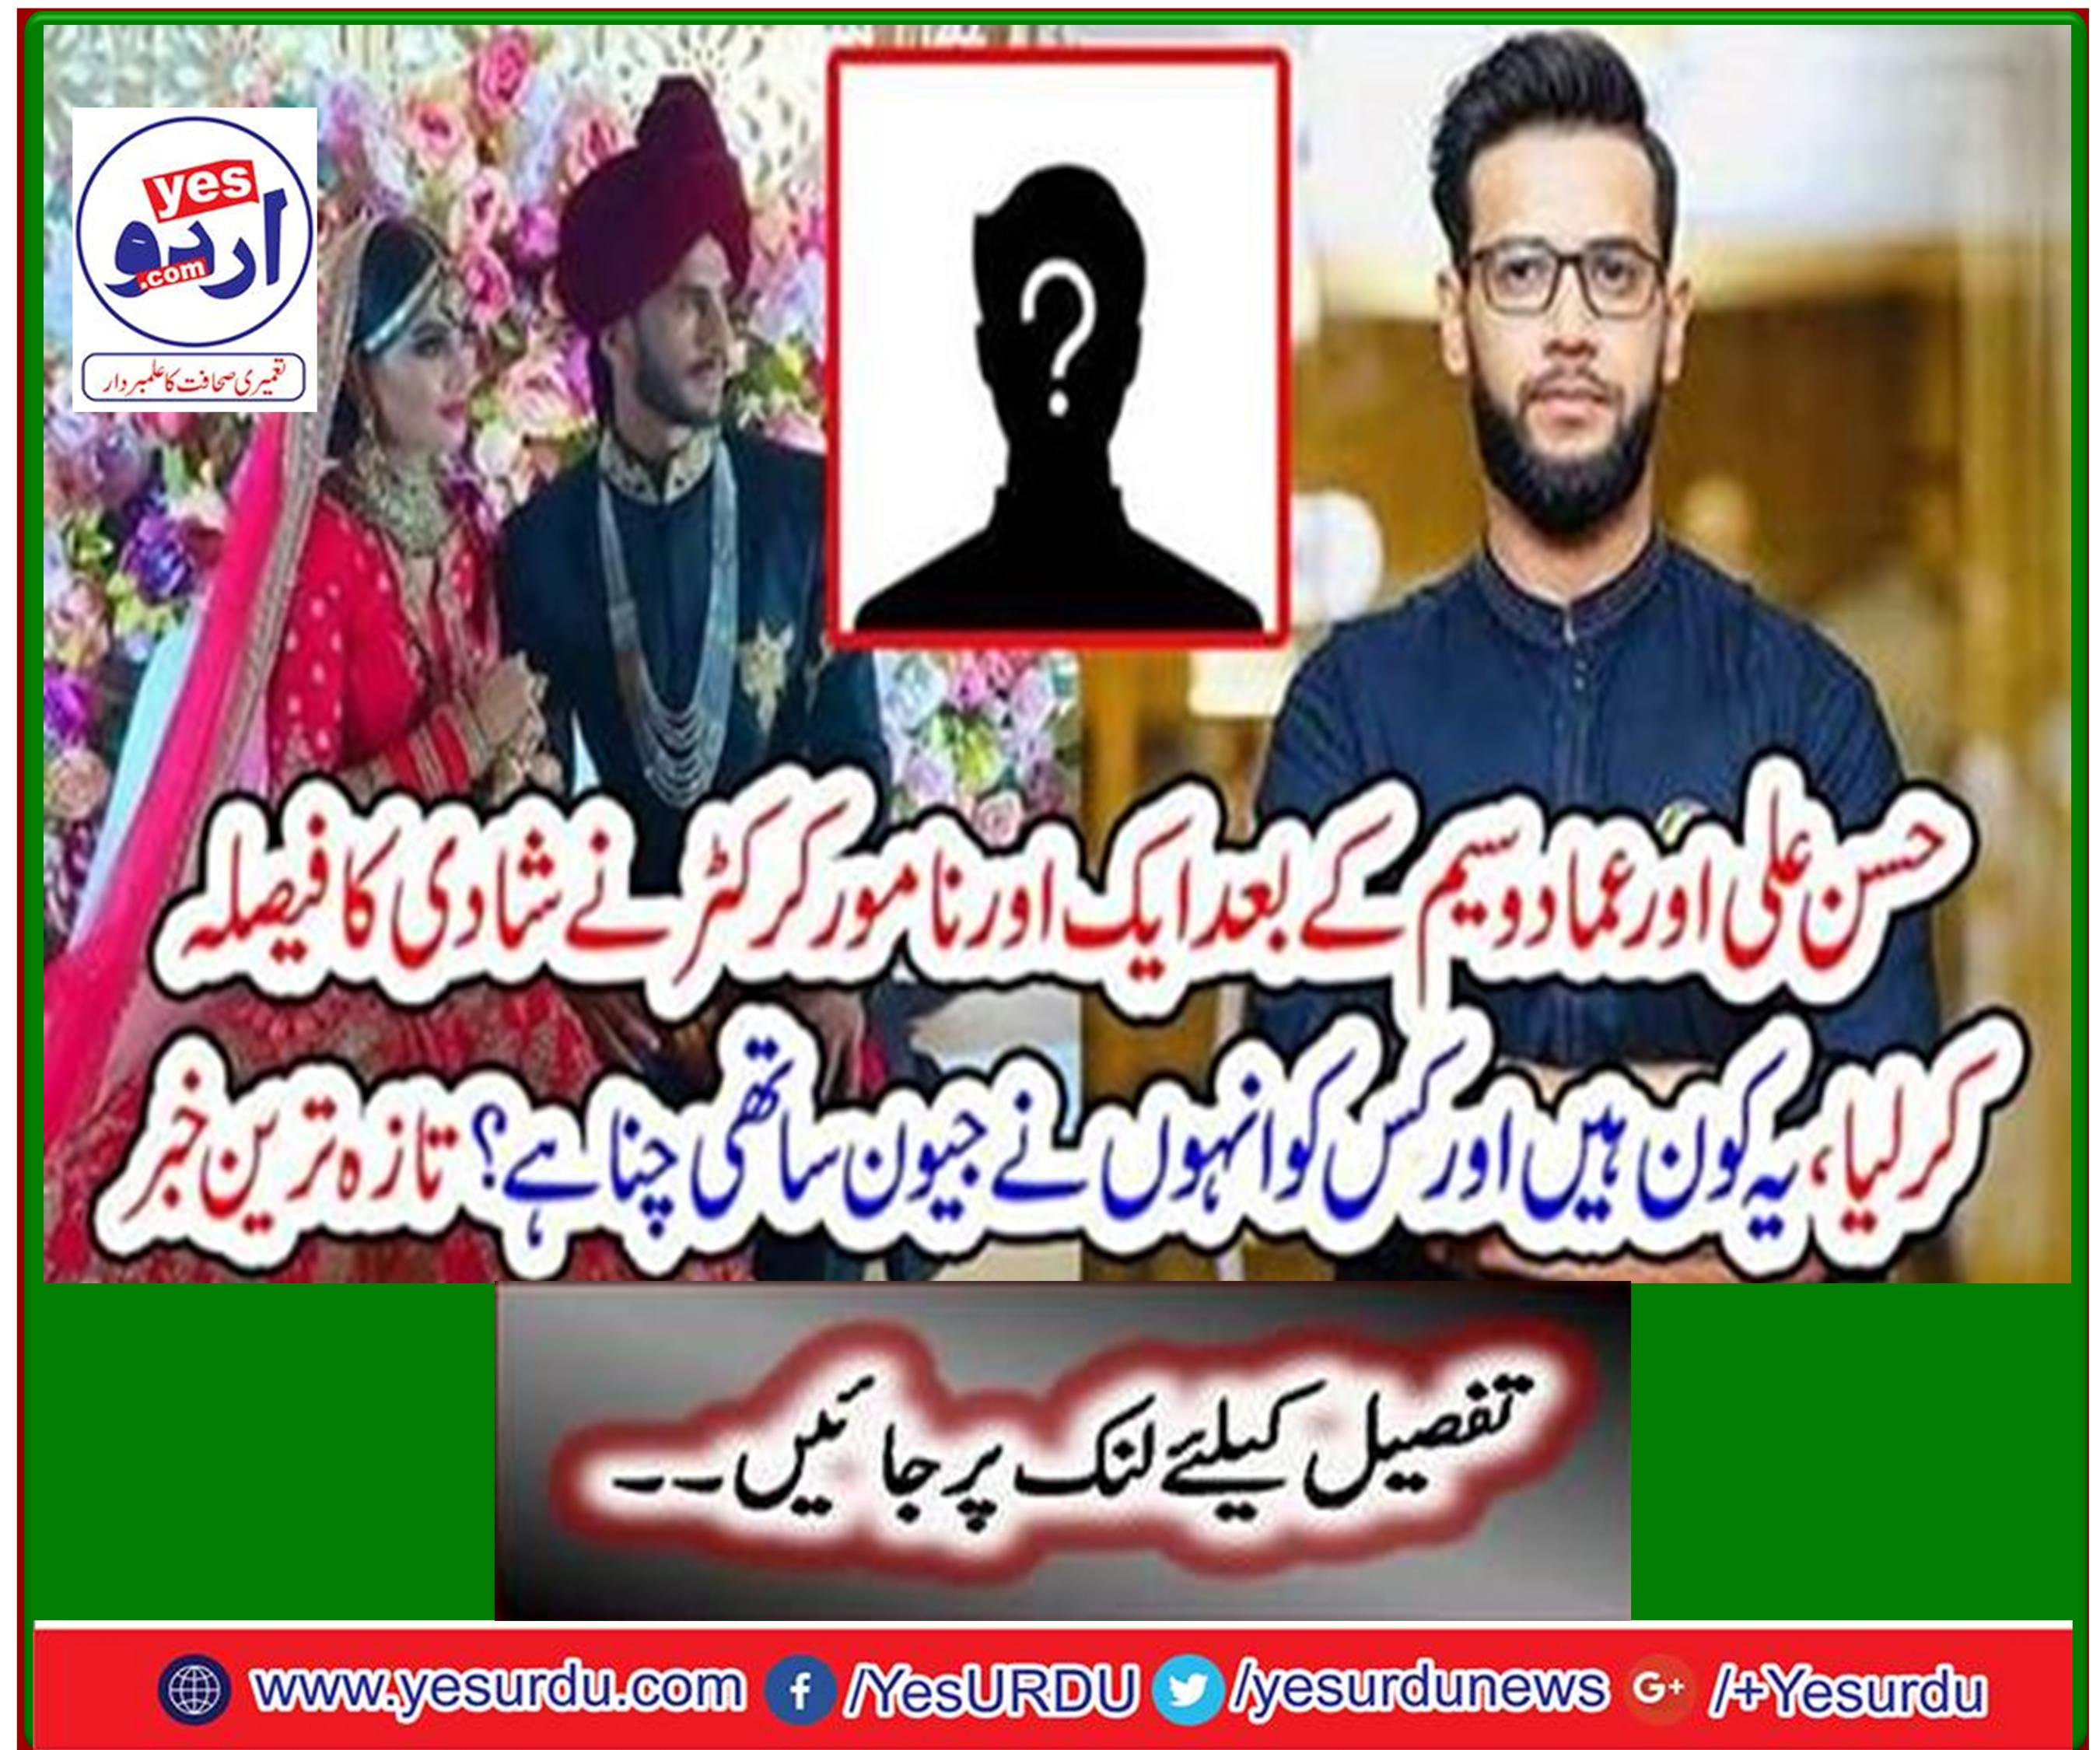 After Hassan Ali and Emad Wasim another eminent cricketer decided to get married, who are they and whom have they chosen as their partner? Latest news